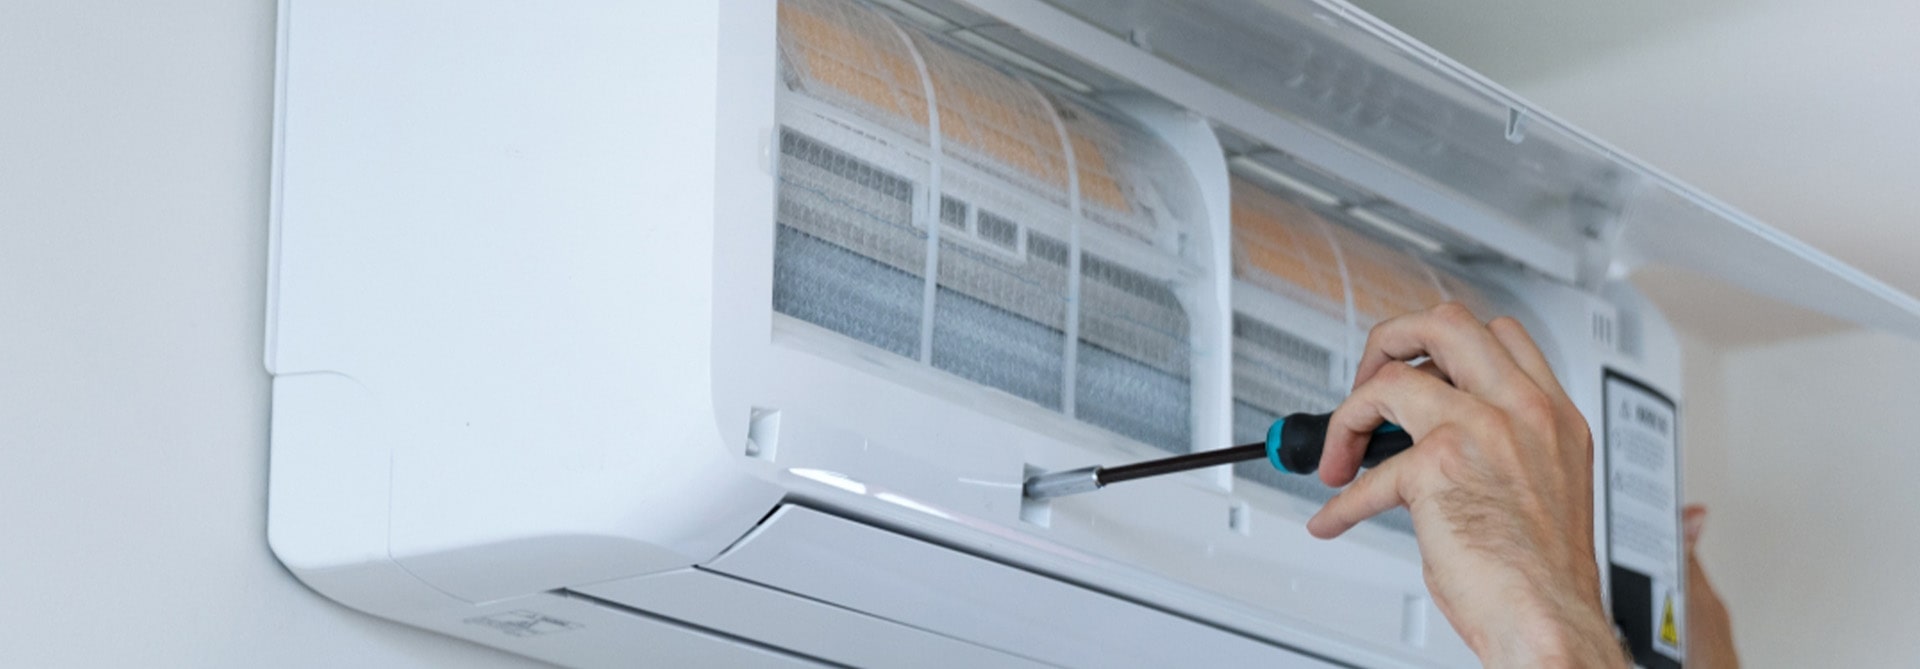 Aircon Maintenance Guide Should You Repair Or Replace Your Aircon